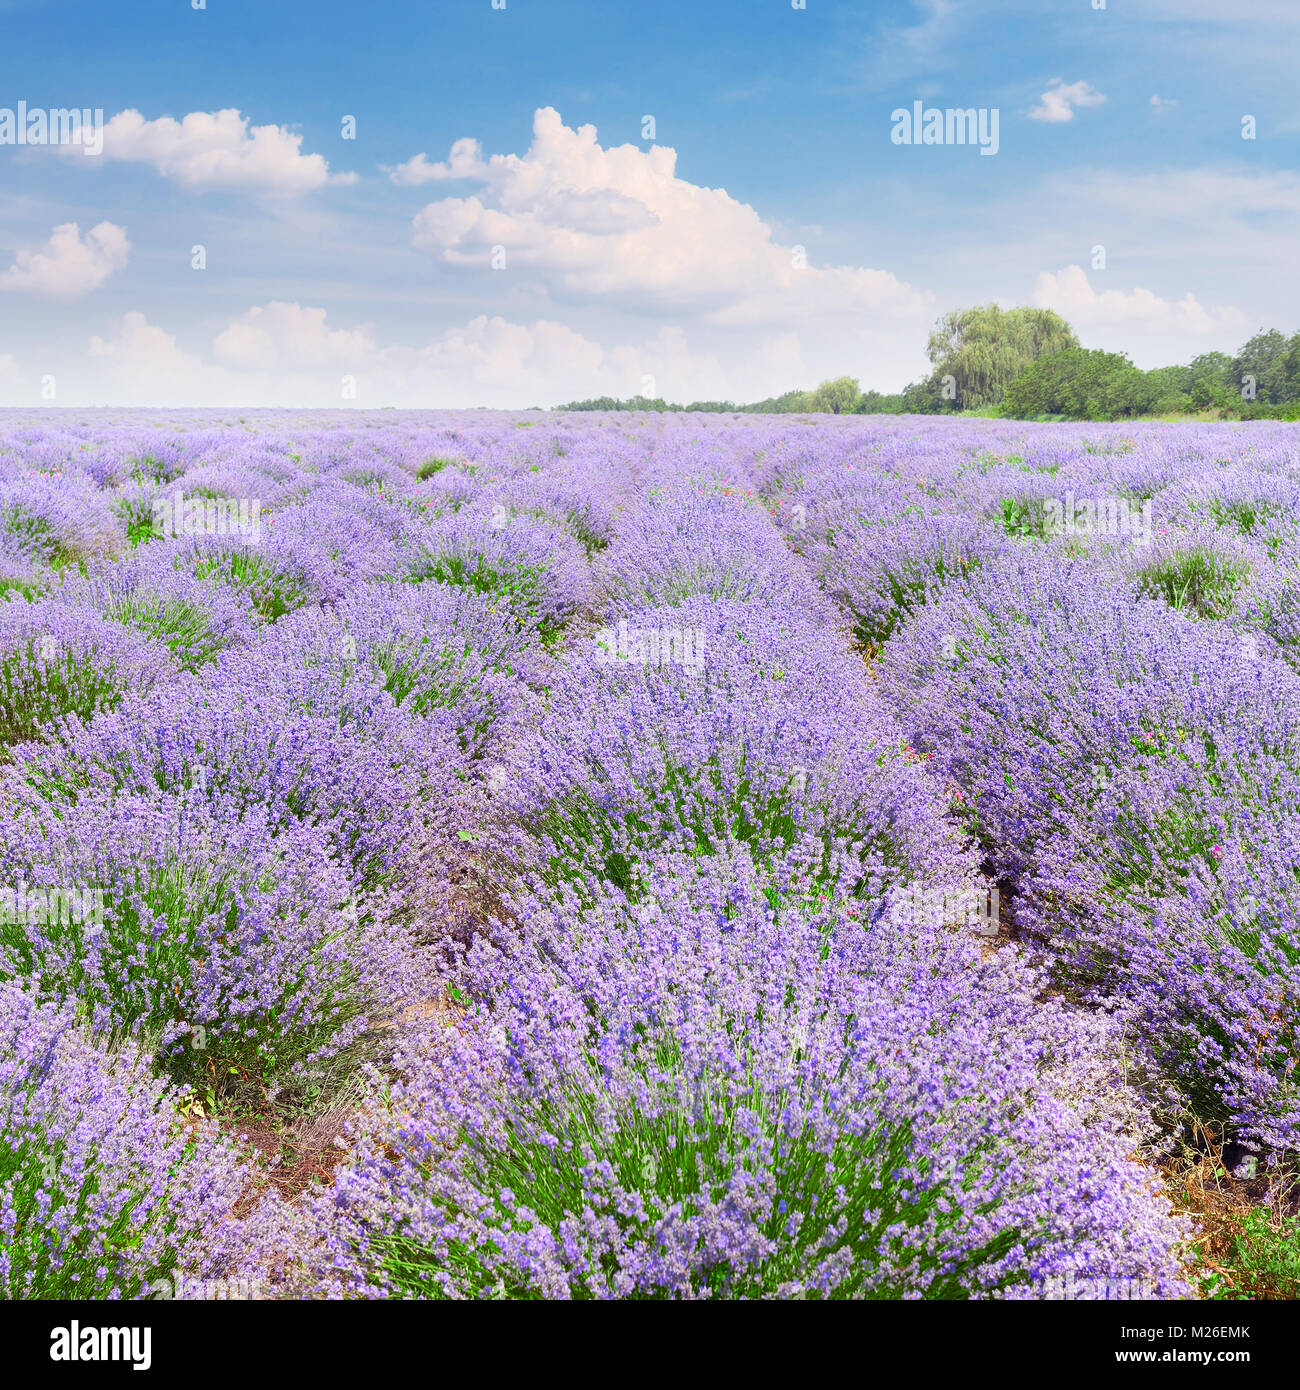 Picturesque lavender field with ripe flowers and bright blue sky. Stock Photo